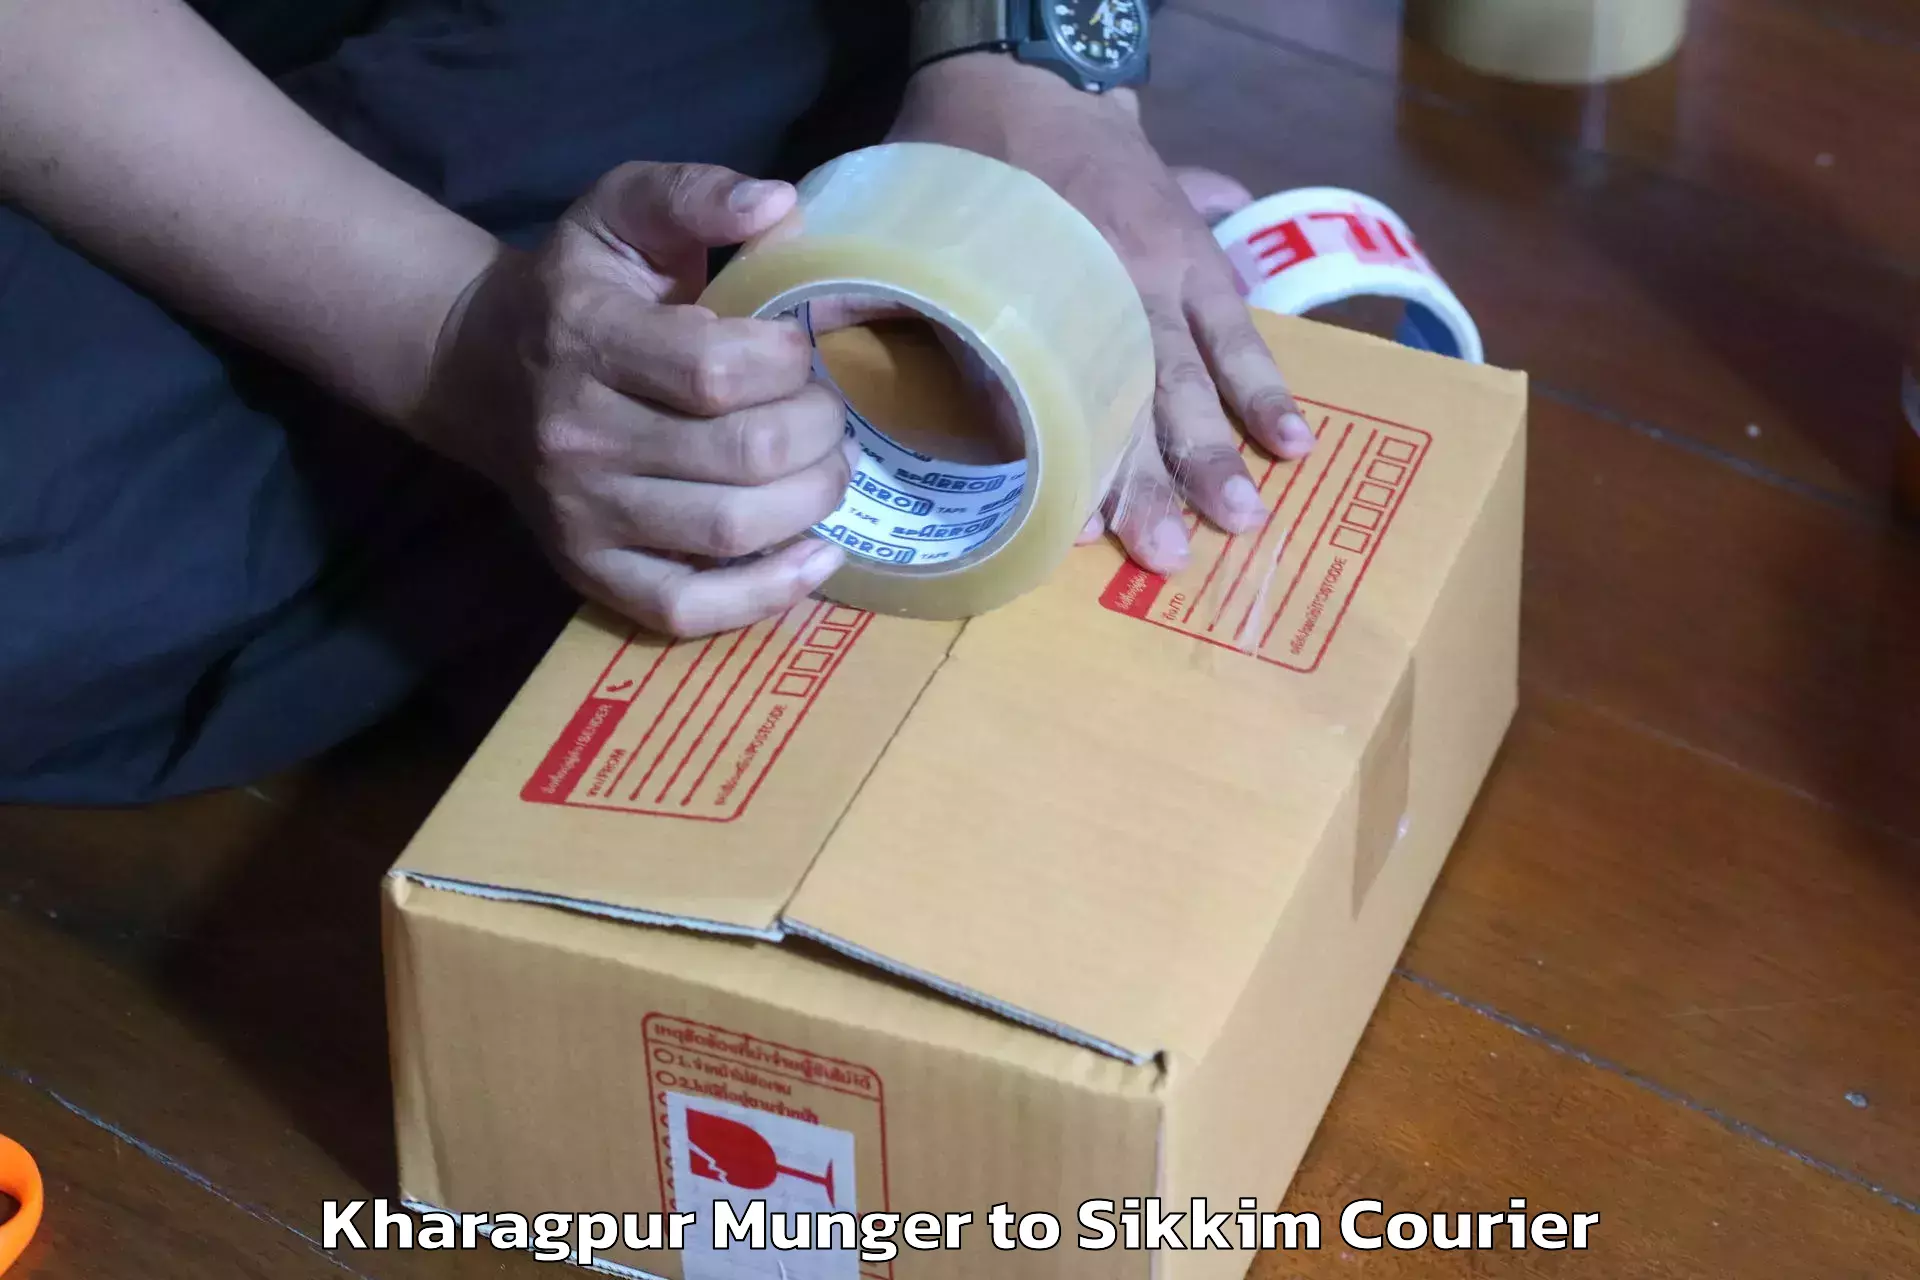 Home goods moving company Kharagpur Munger to Sikkim